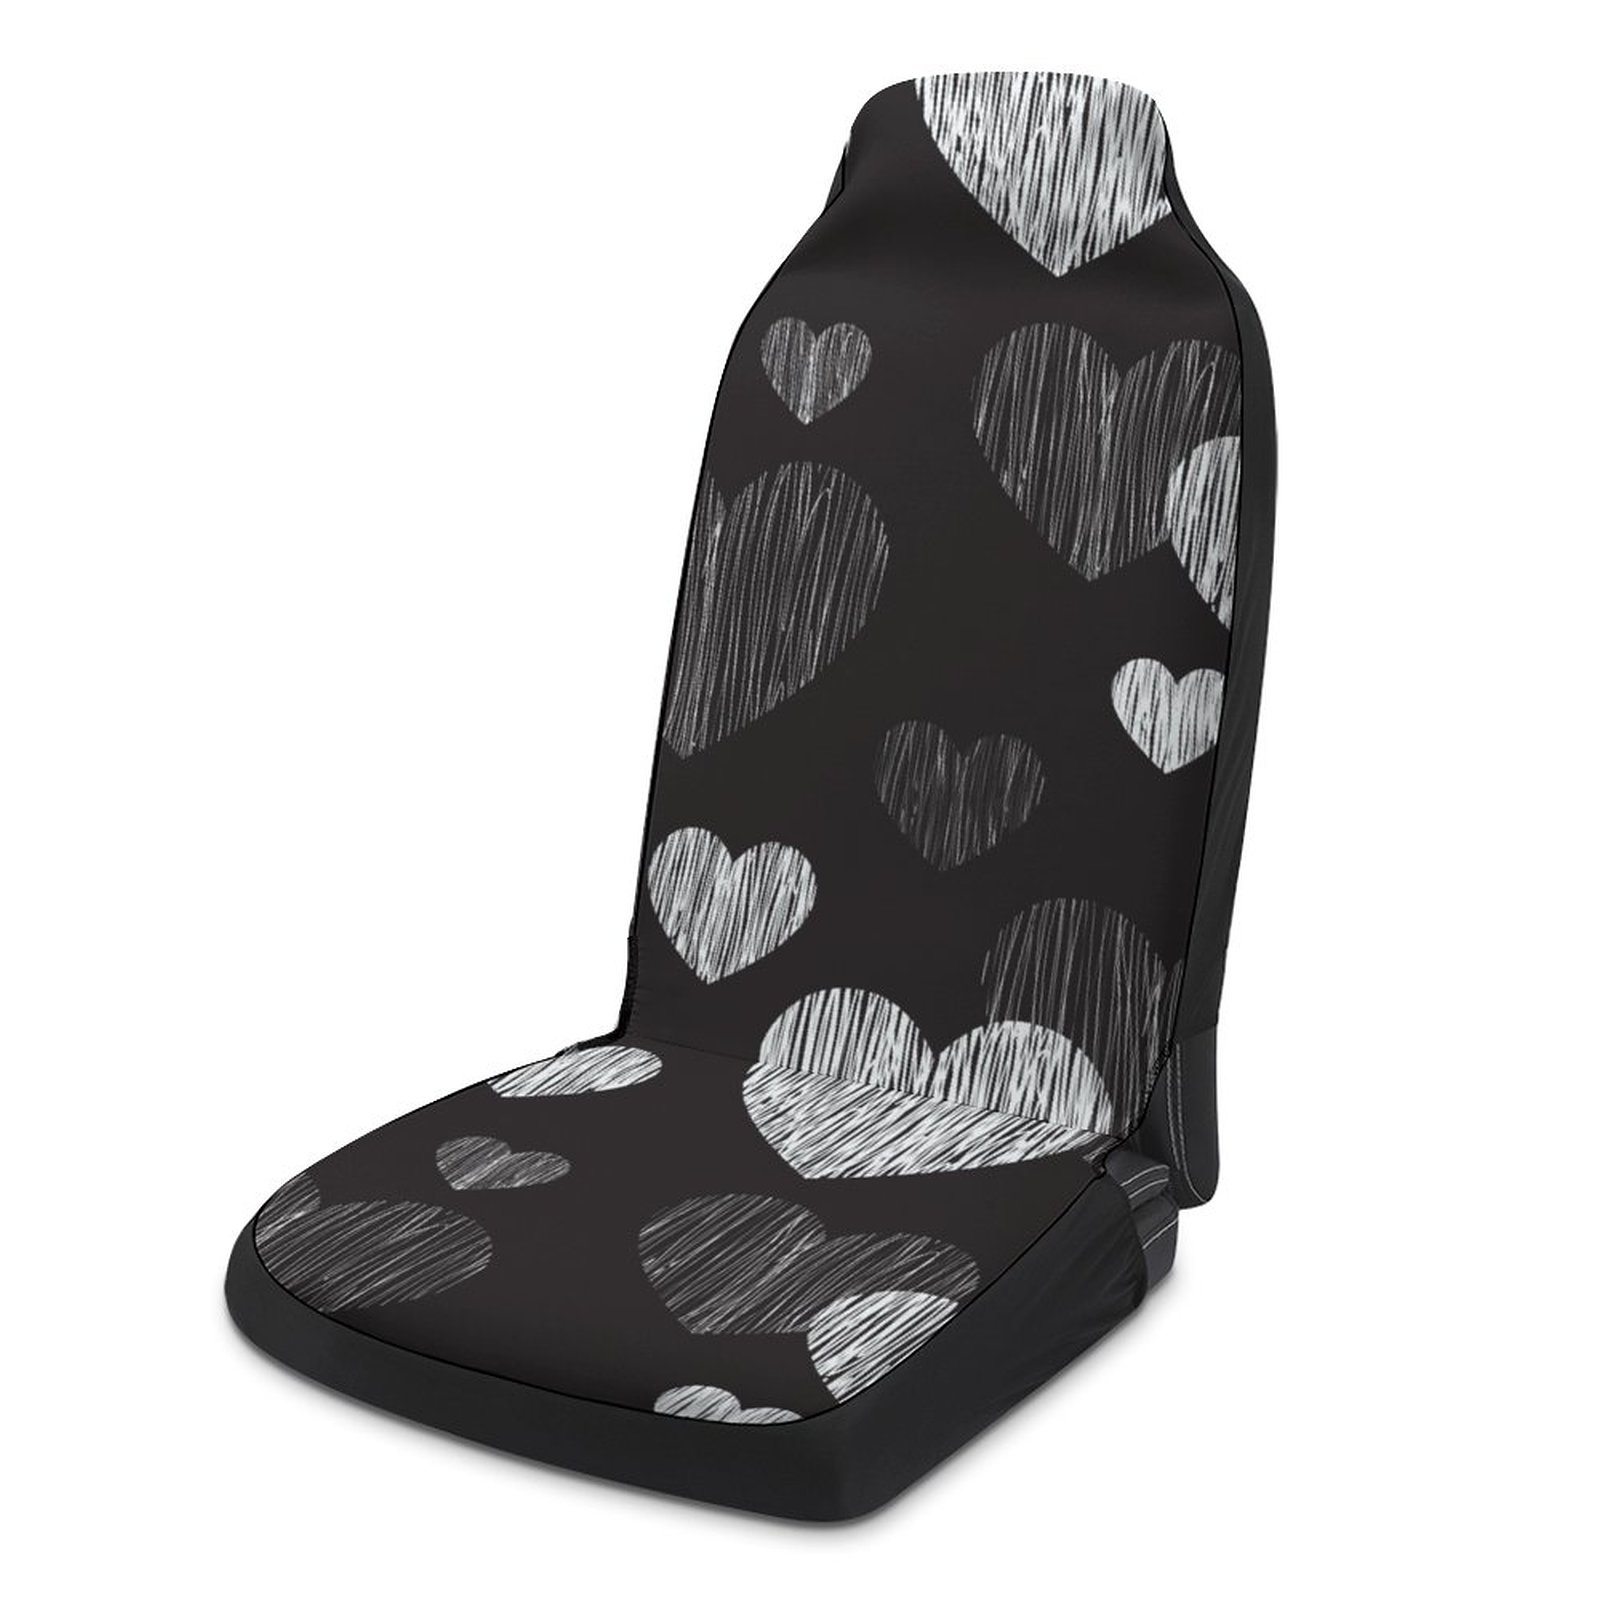 seat covers do